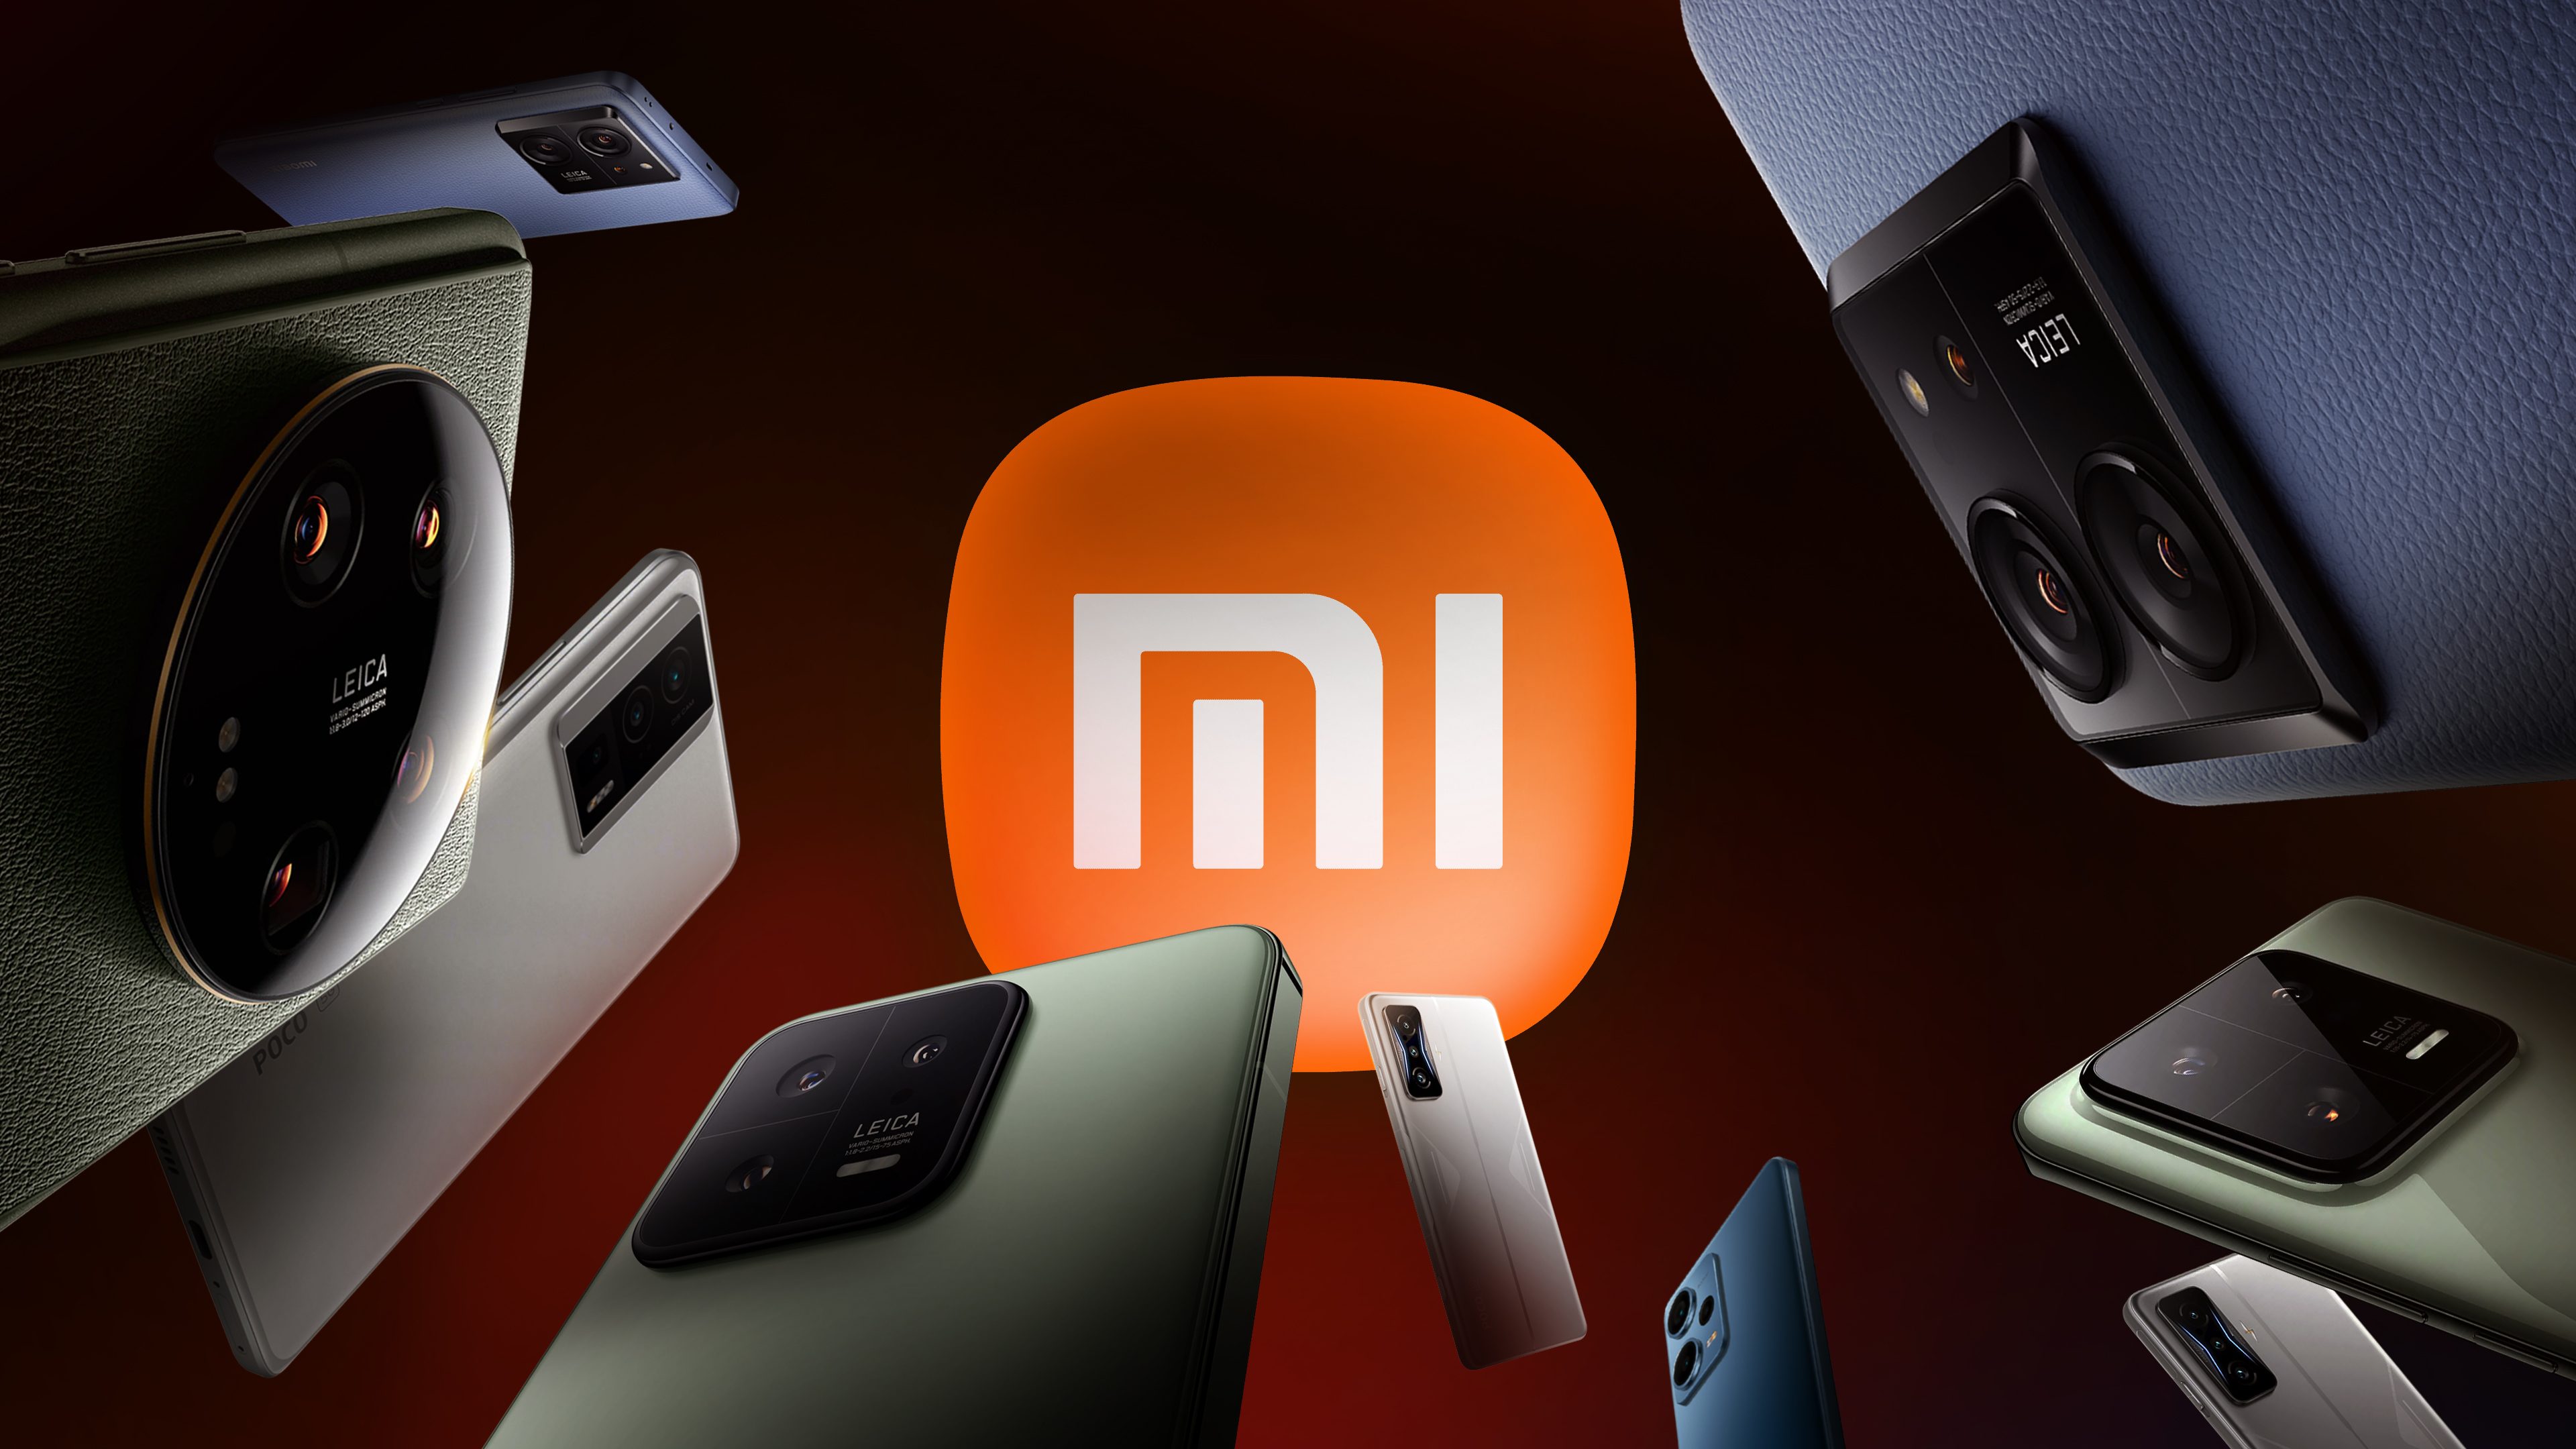 Xiaomi 13 Ultra to launch in China in April followed by global release in  coming months; will it come to India? - Technology News